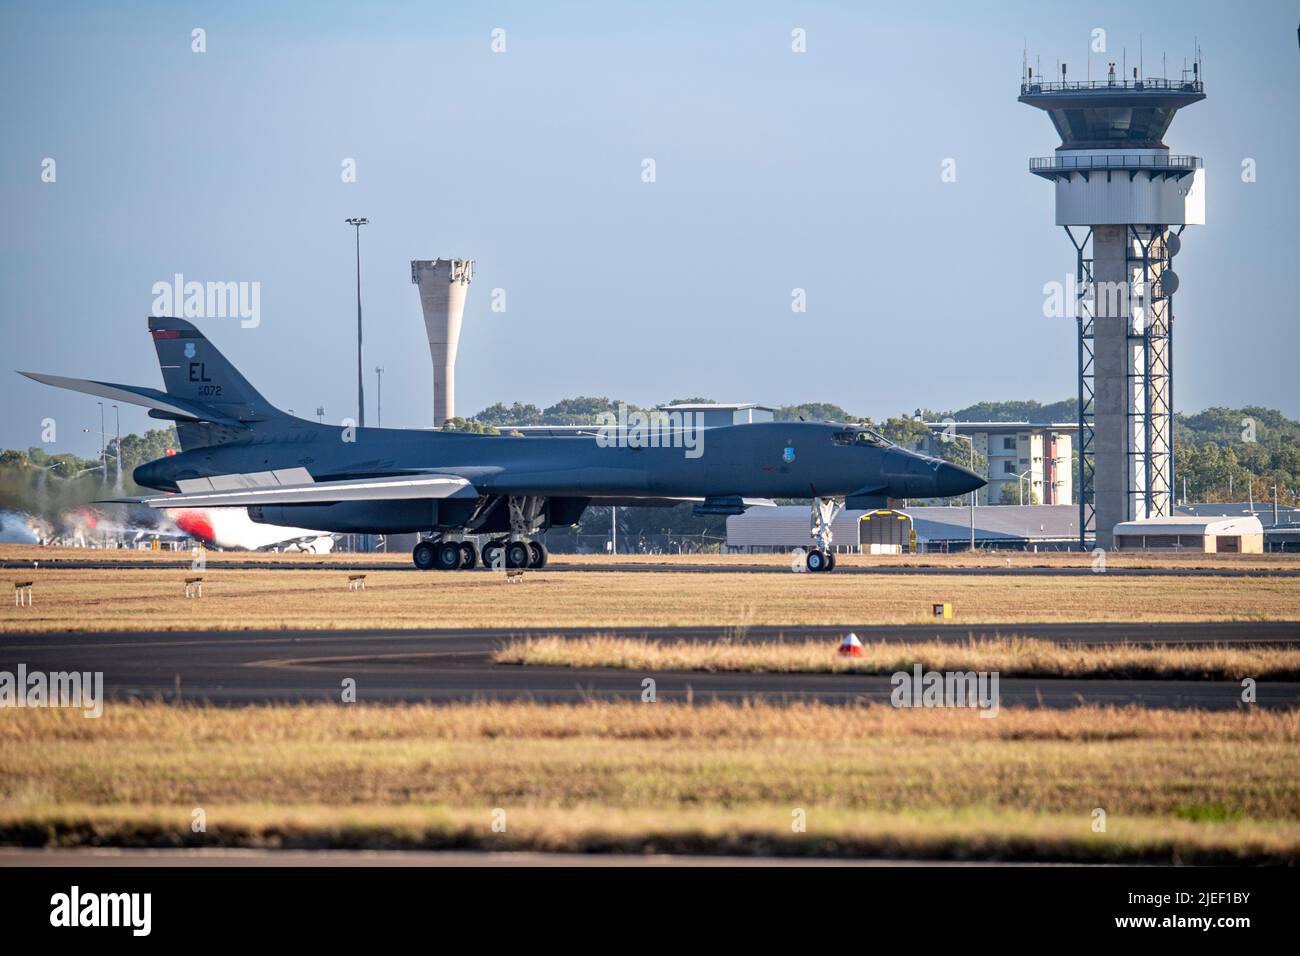 A U.S. Air Force B-1B Lancer assigned to the 34th Expeditionary Bomb Squadron, Ellsworth Air Force Base, South Dakota, taxies past the Darwin airport control tower on its way to the Royal Australian Air Force base to take on fuel in Darwin, Northern Territory, Australia, June 22, 2022. Bomber missions contribute to joint force lethality and deter aggression in the Indo-Pacific by demonstrating United States Air Force ability to operate anywhere in the world at any time in support of the National Defense Strategy. (U.S. Air Force Photo by Tech. Sgt. Chris Hibben) Stock Photo